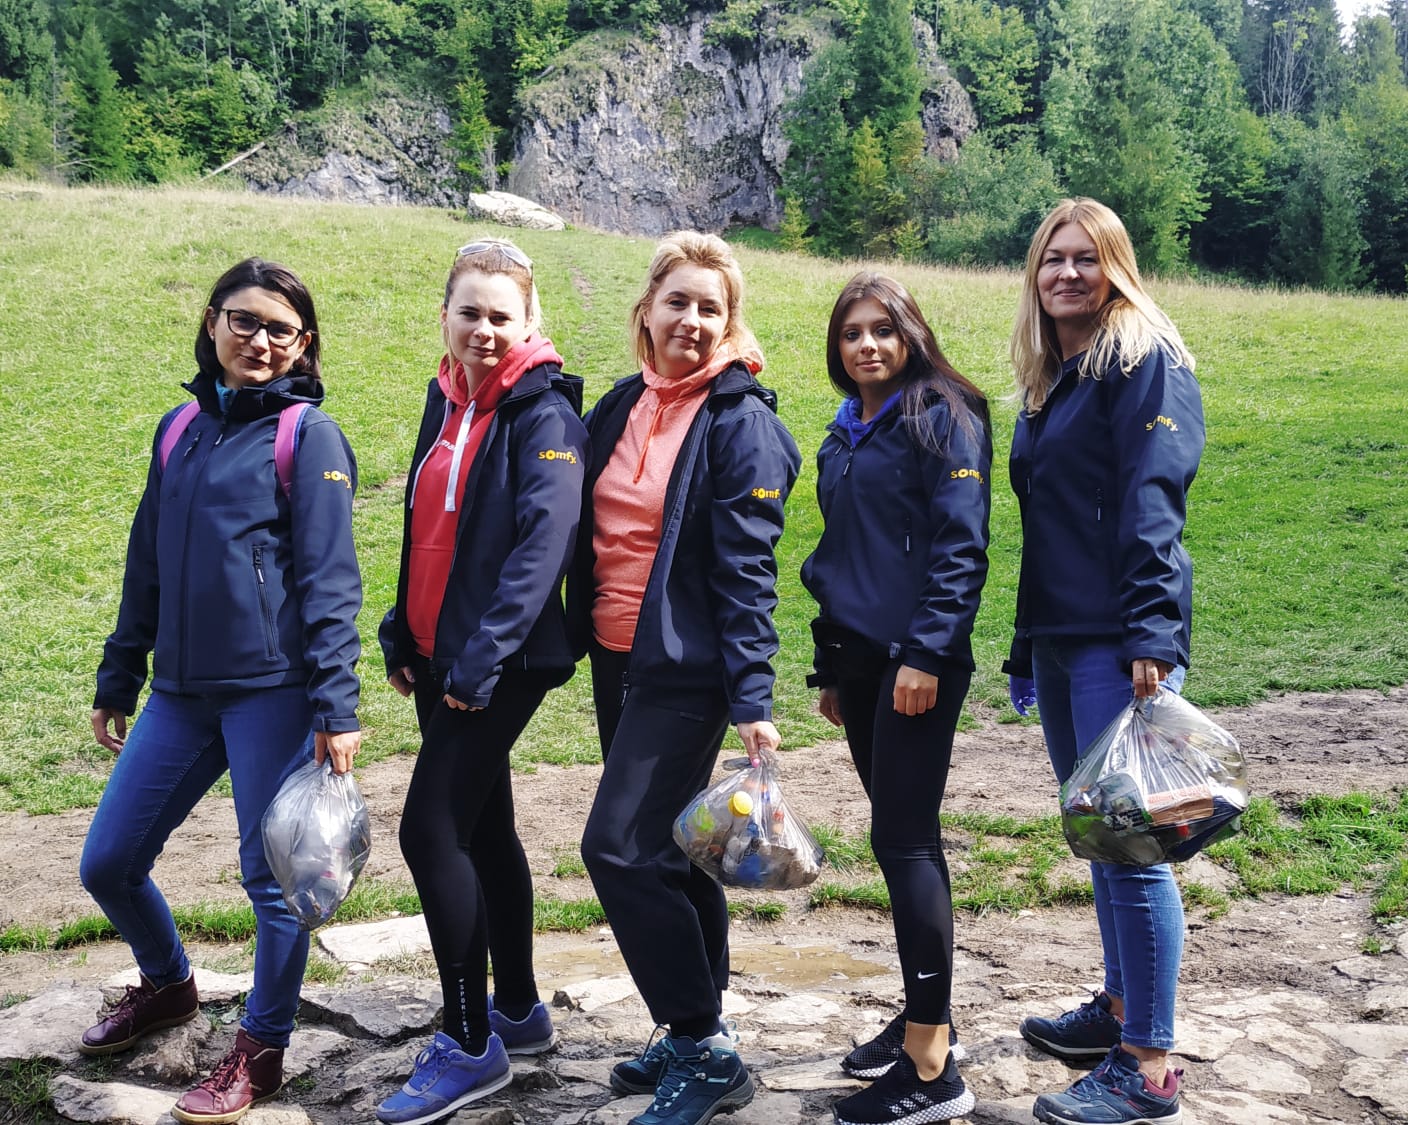 <p><strong>GORGE HOMOLE NATURE RESERVE Poland</strong><br />
On the weekend of September 17, a team of SOMFY employees went to the Gorge Homole Nature Reserve in Poland to collect abandoned waste. They used the time to share experiences in the service of nature. </p>
